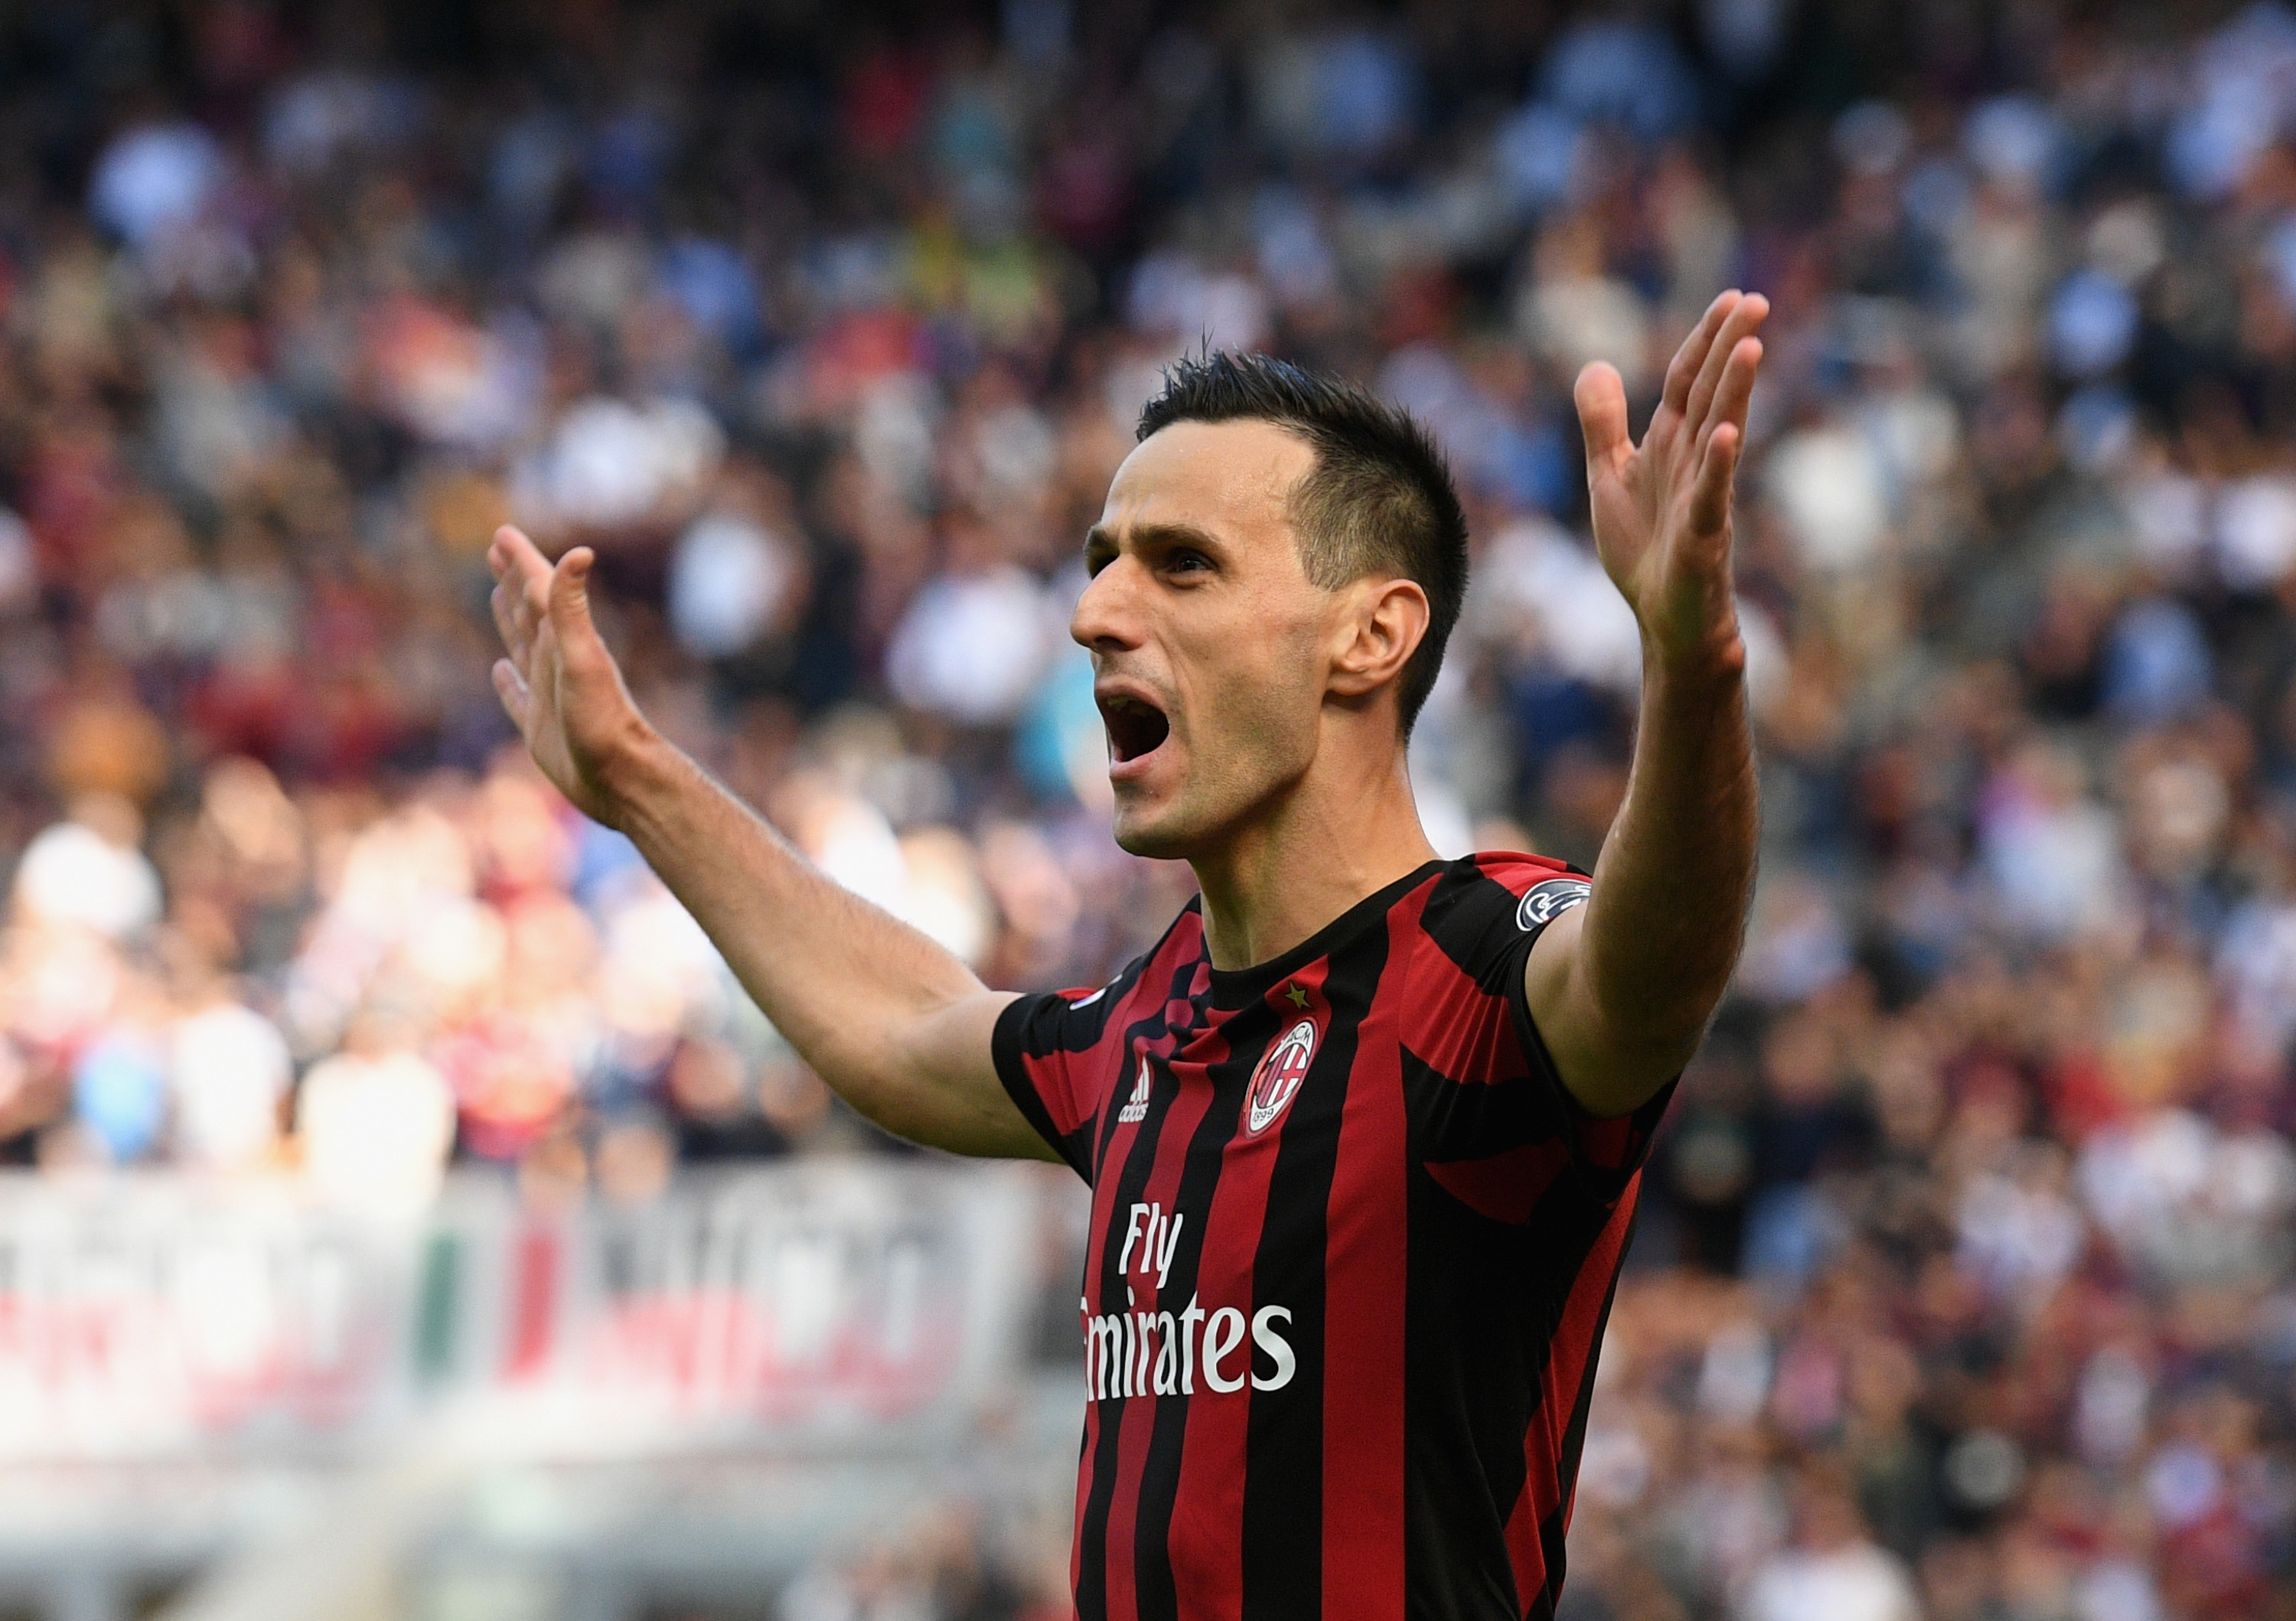 Gazzetta – Kalinic’s availability will be clearer in next 2 days